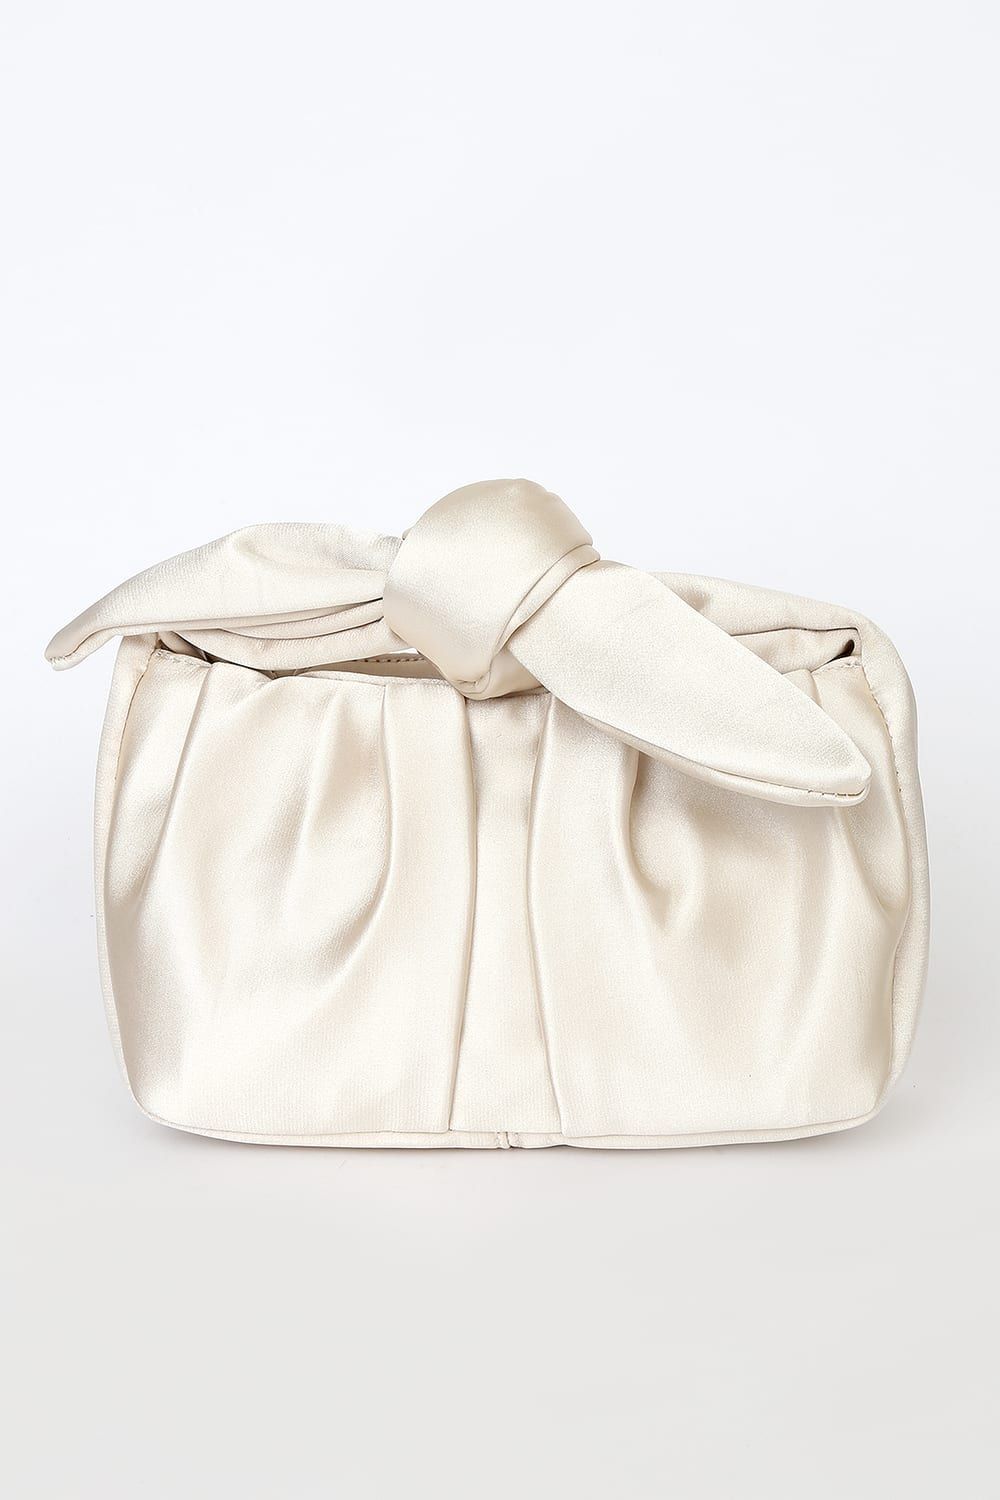 Essential Style Champagne Satin Knot Handle Clutch Bag | Lulus (US)